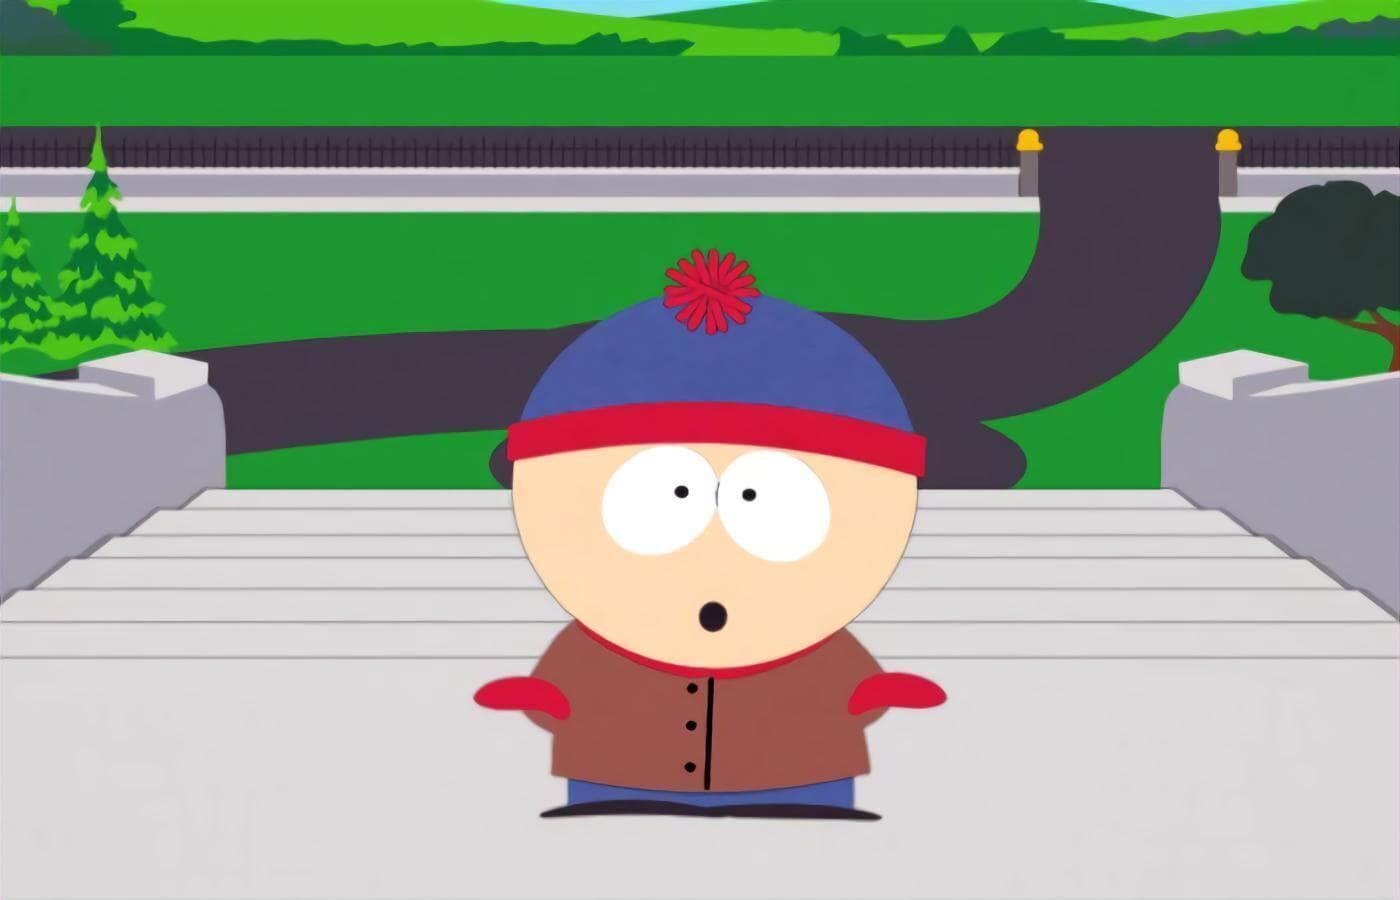 South Park - The Biggest Douche in the Universe